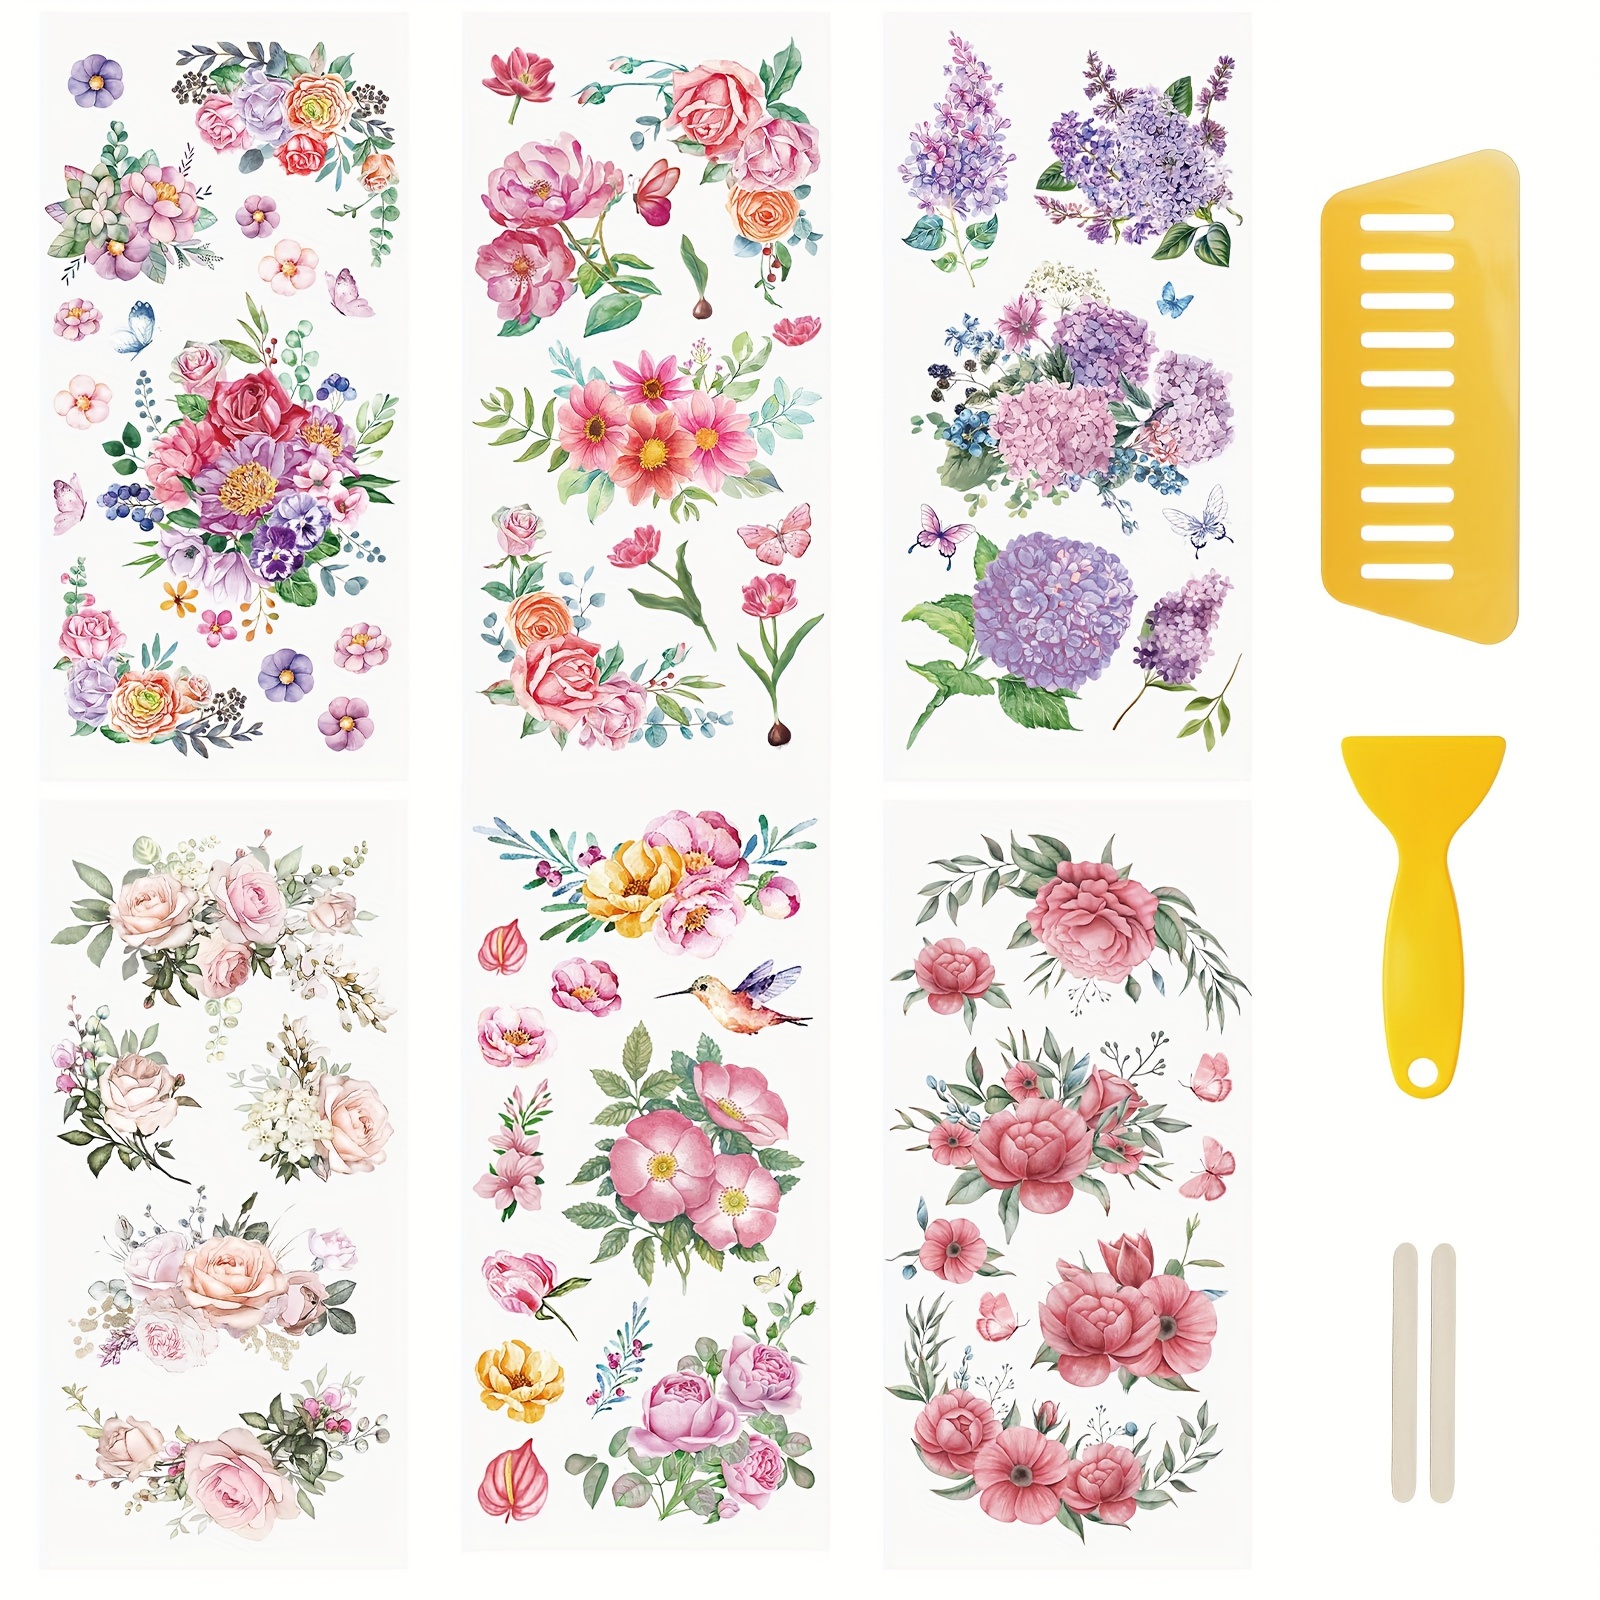 

6 Sheets Spring Flower Decals Waterproof Stickers Furniture Craft Decals For Diy Scrapbooking Photo Albums Greeting Cards